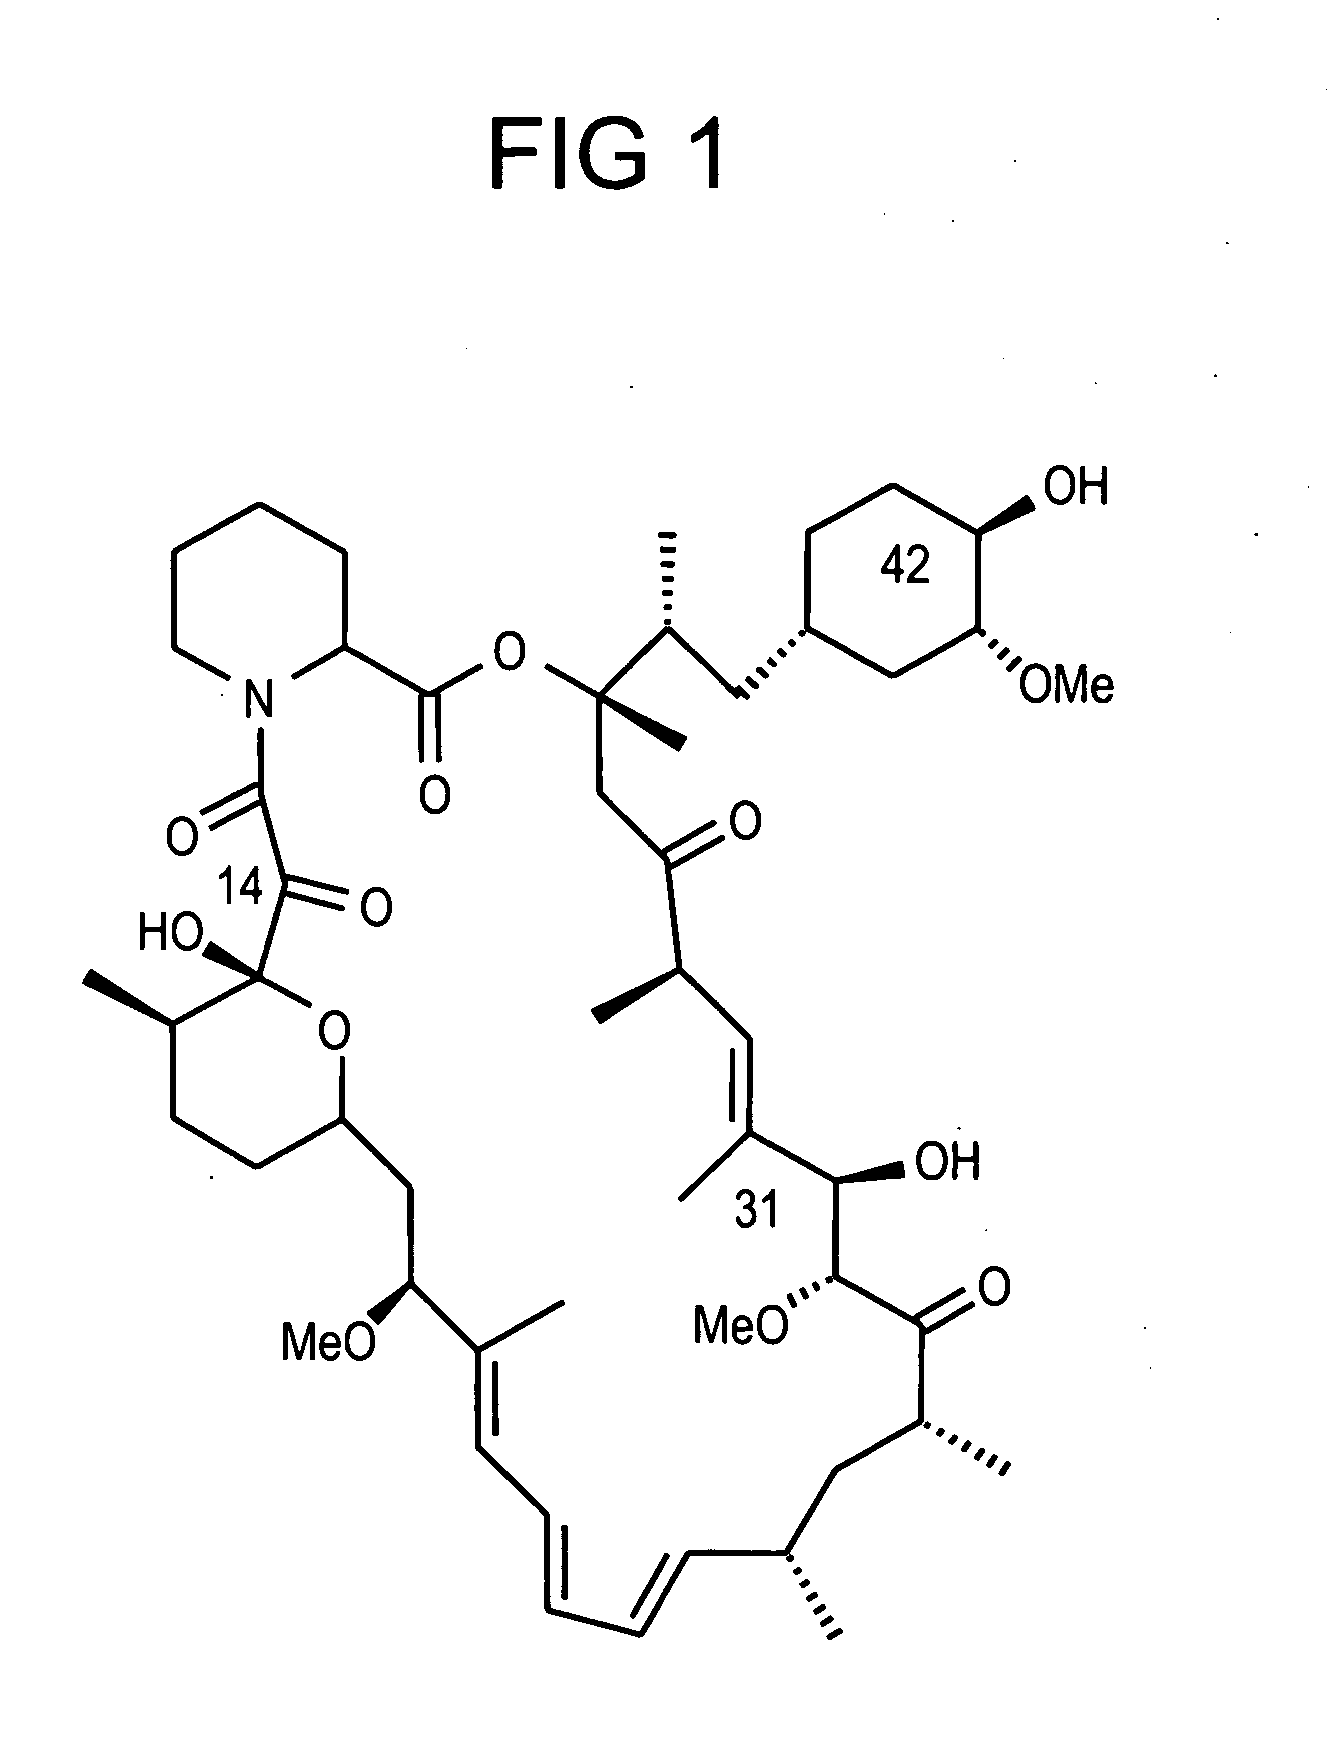 Isomers of rapamycin and 42-Epi-rapamycin, methods of making and using the same